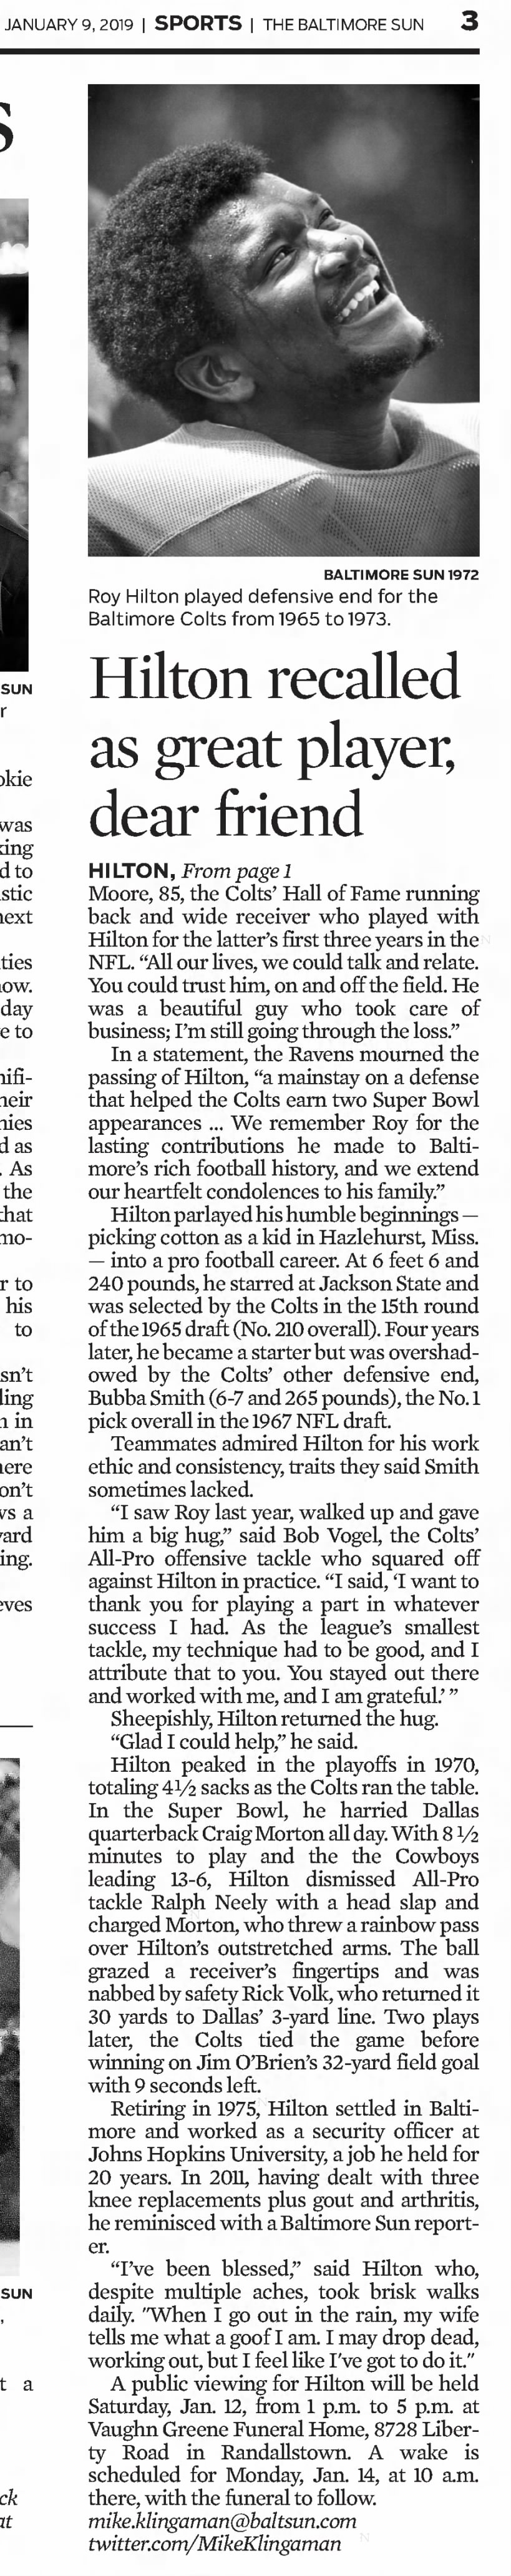 Roy HIlton, Baltimore Colts Defensive End, Obituary (jump page)